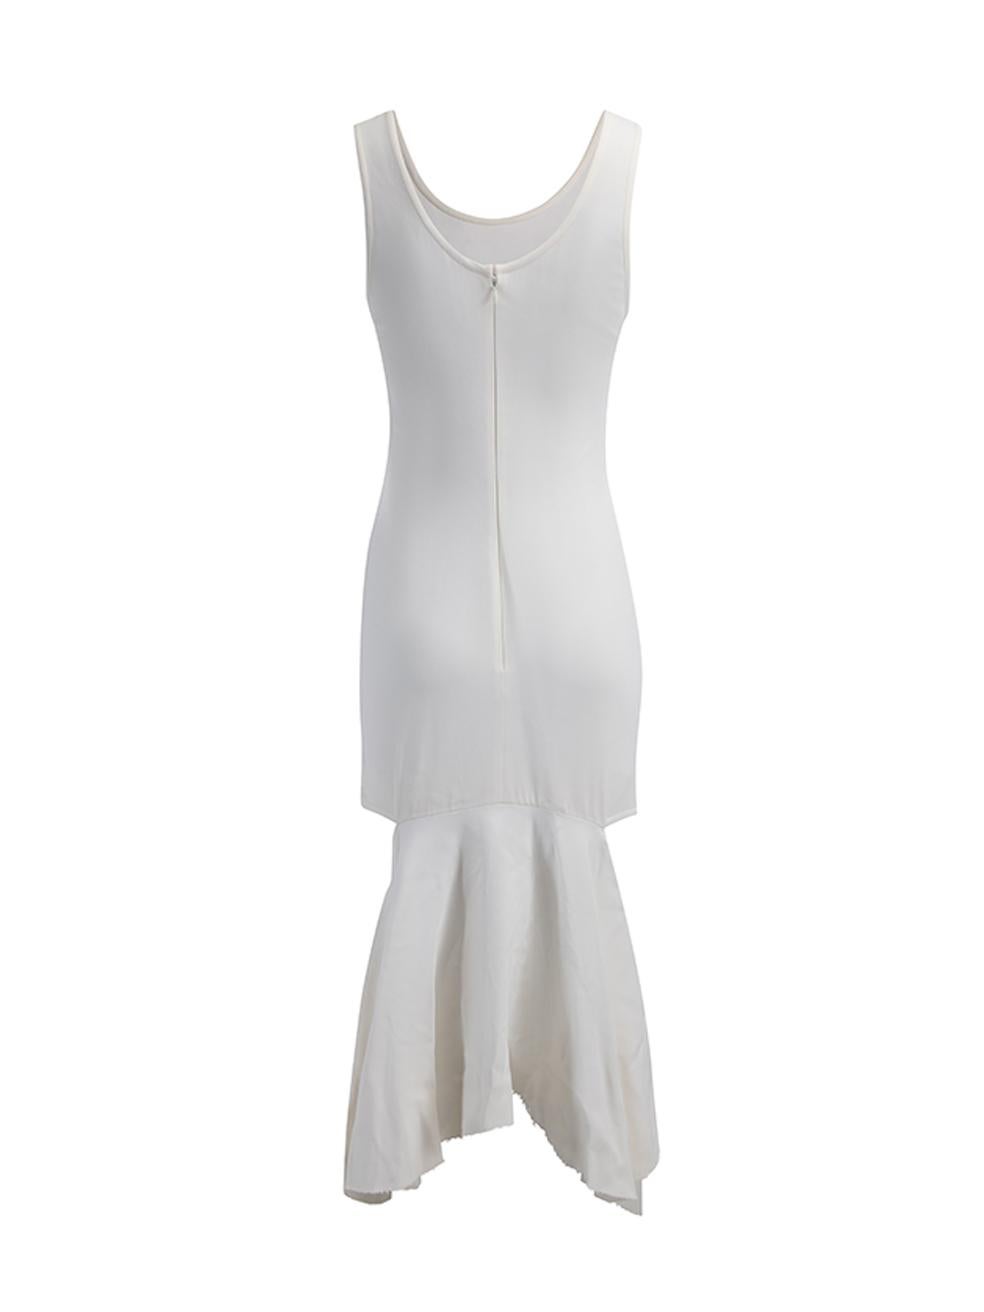 Pre-Loved Givenchy Women's White Drop Waist Cut Out Detail Knee Length Dress In Excellent Condition For Sale In London, GB